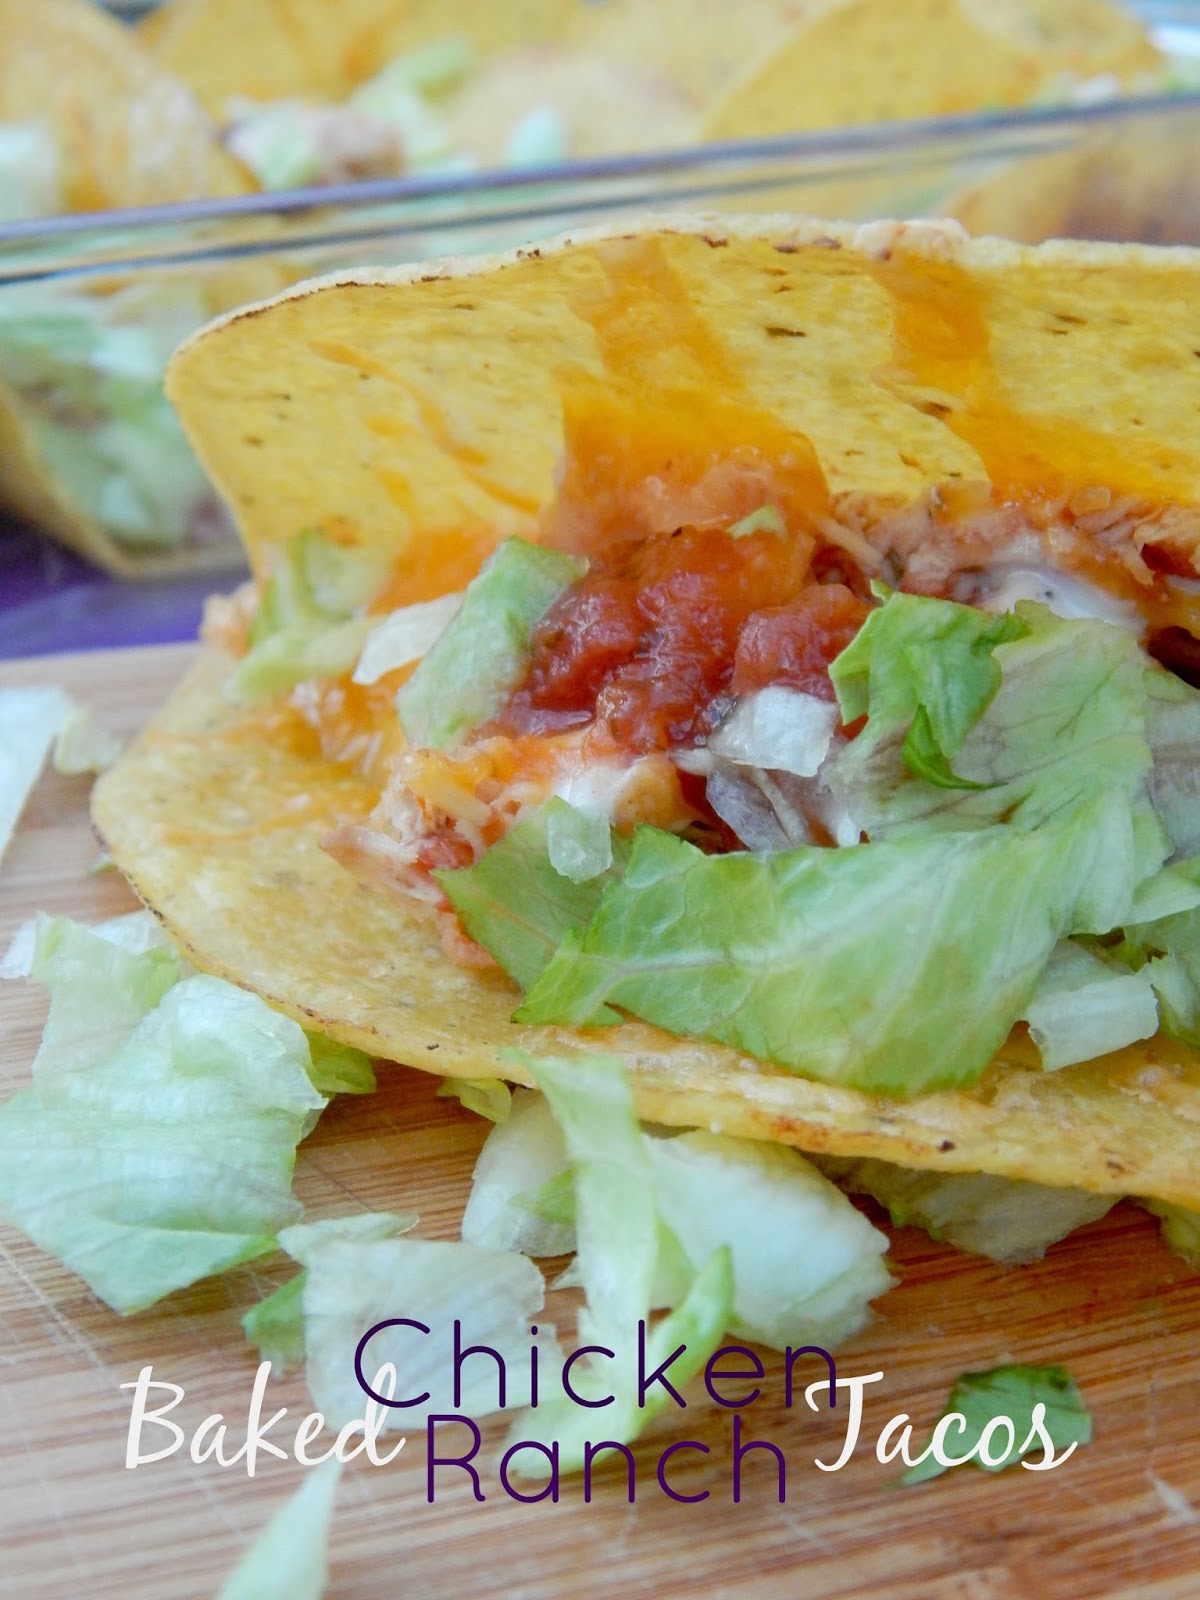 Ally's Sweet and Savory Eats: Baked Chicken Ranch Tacos